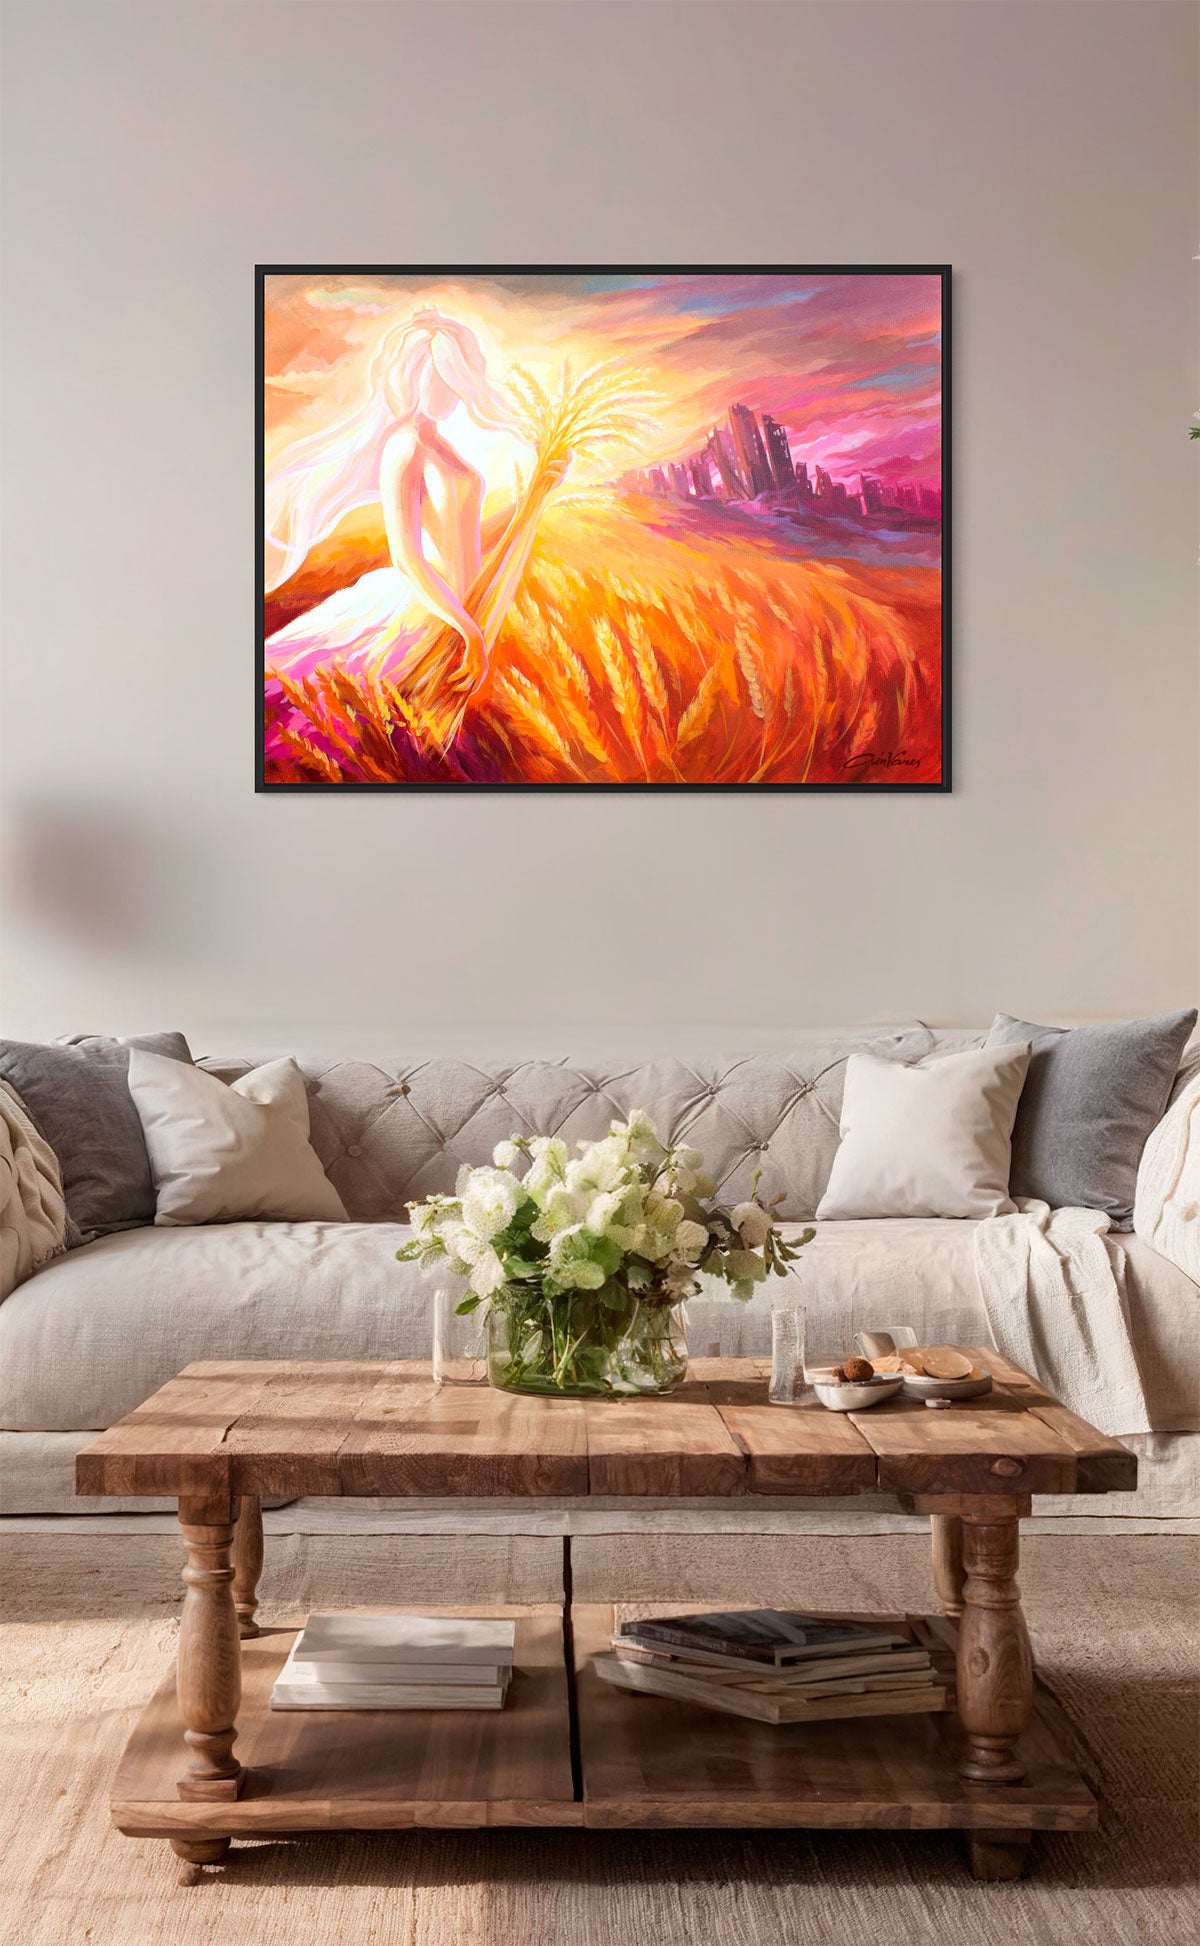 Prophetic Art Print "Open Your Eyes and Look at the Fields" John 4:35-36, Ain Vares Art